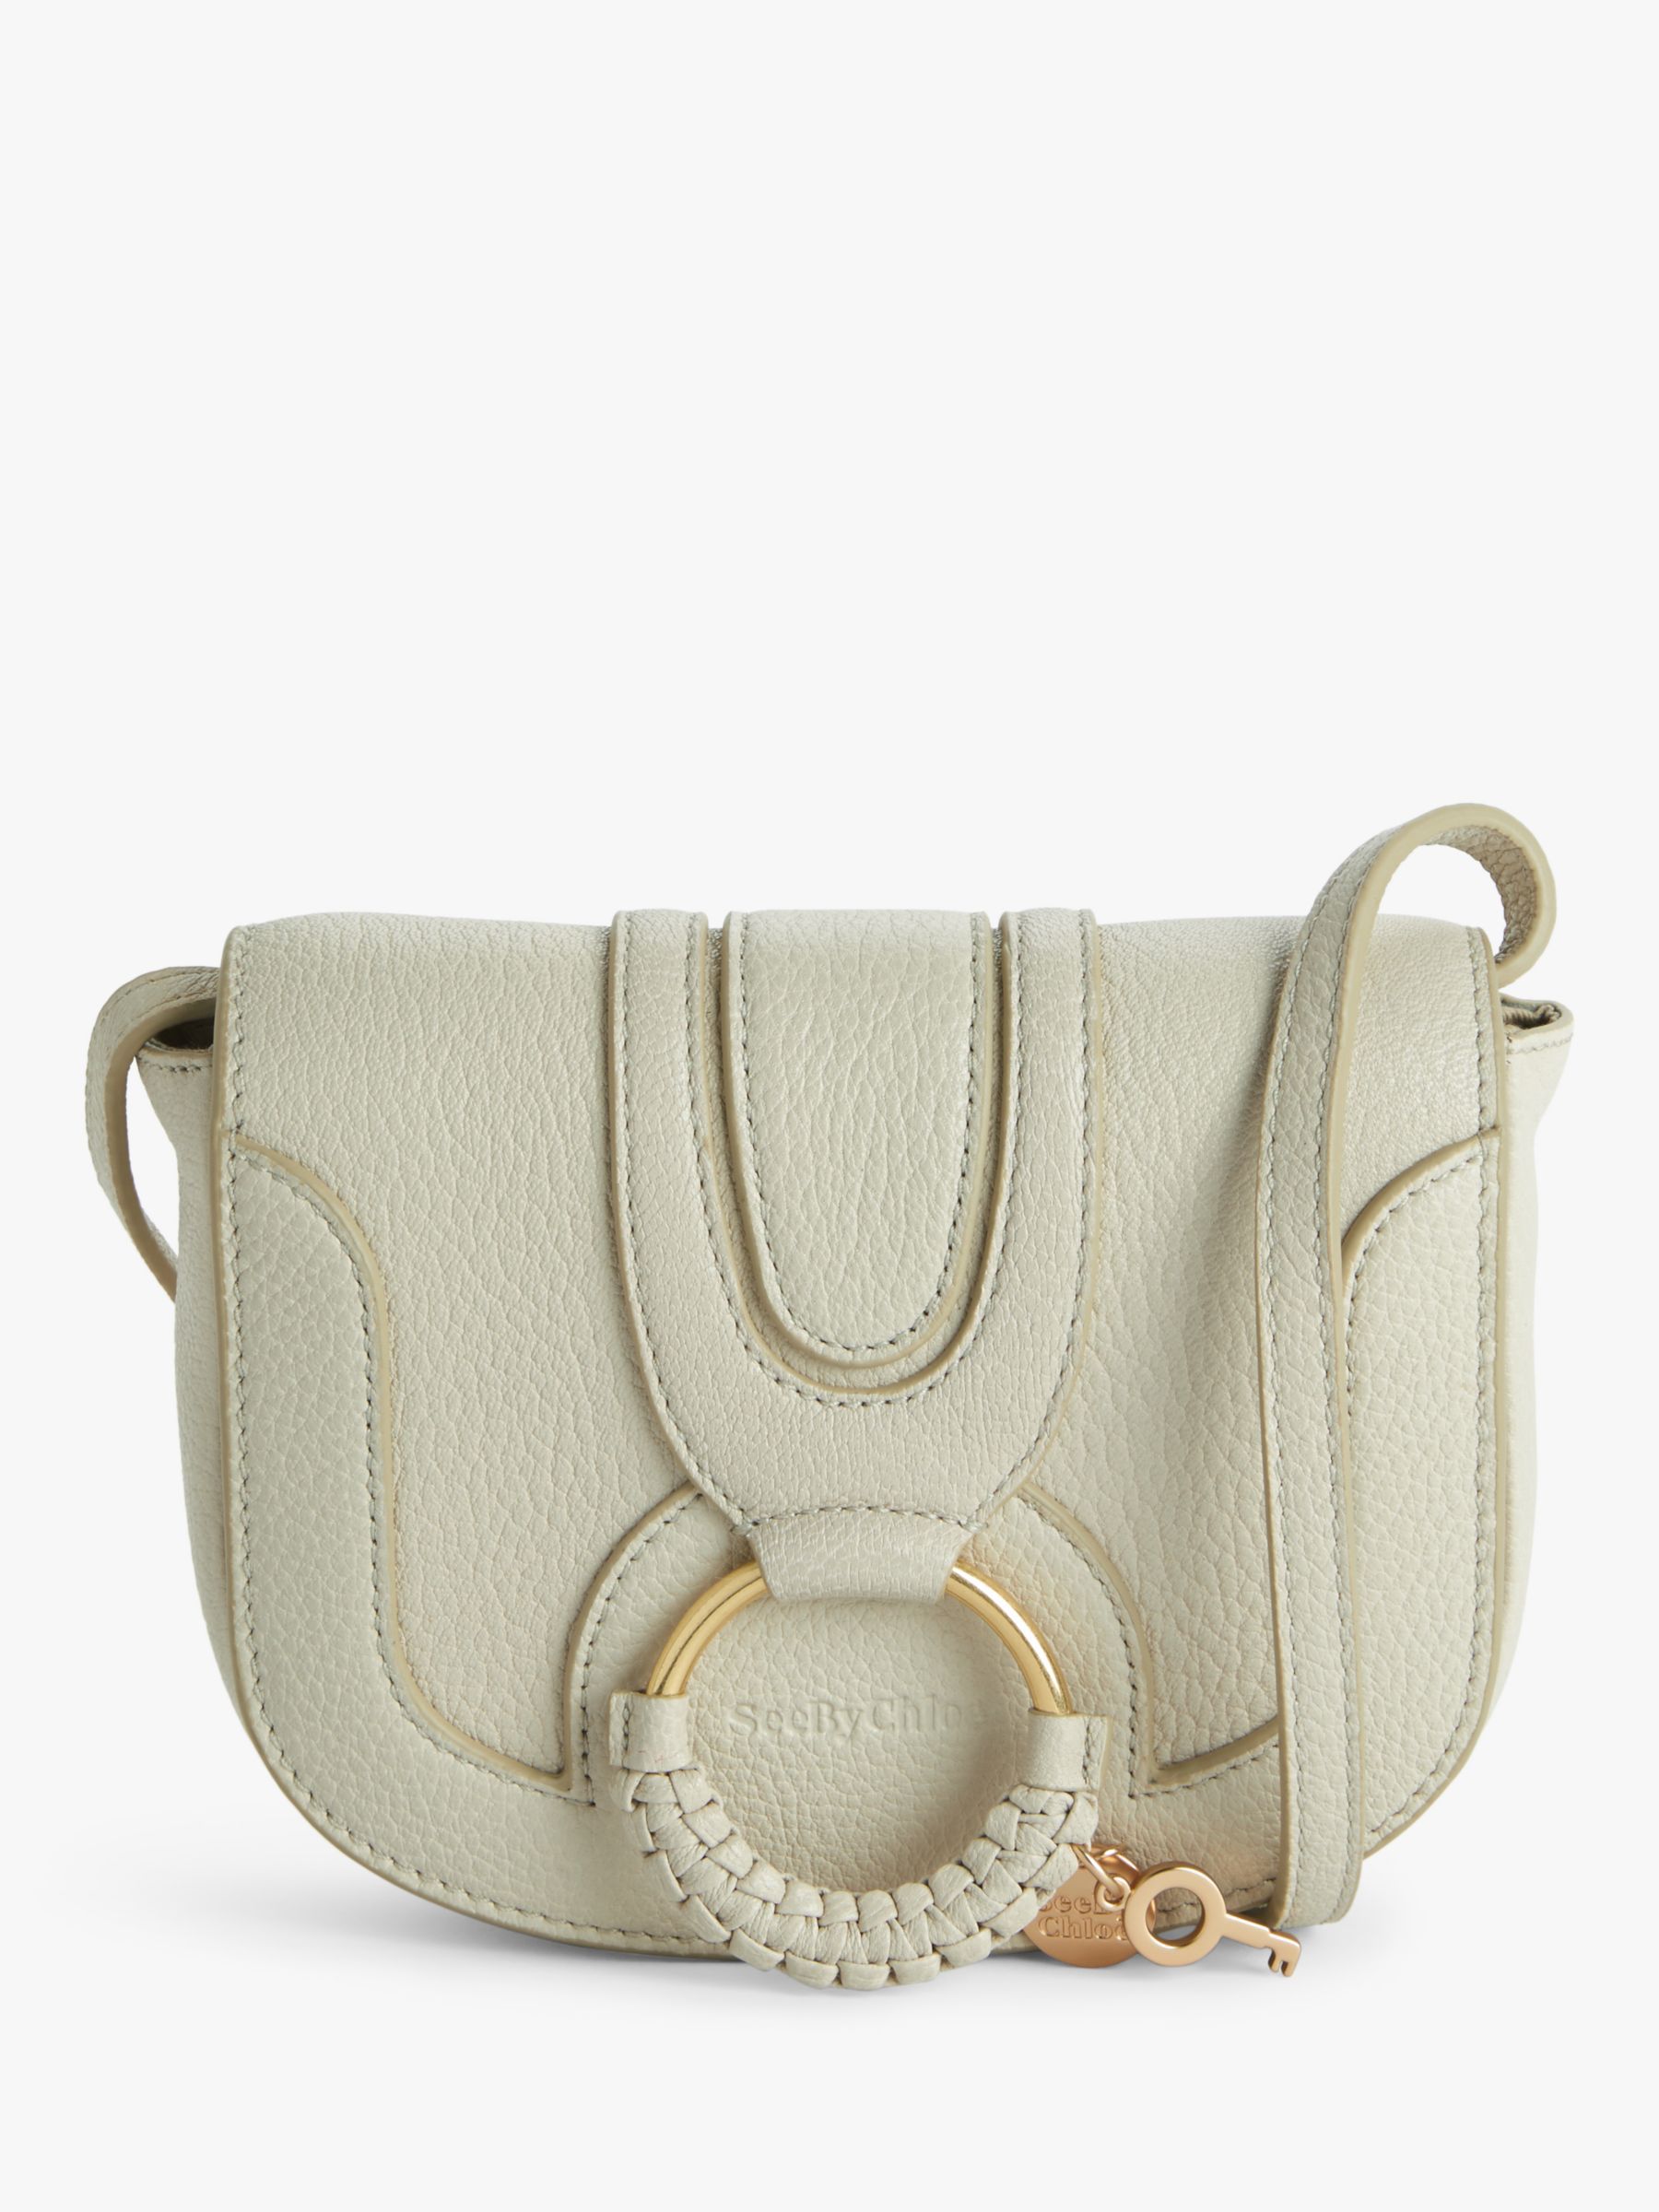 See By Chloé Mini Hana Leather Satchel Bag, Cement Beige at John Lewis ...